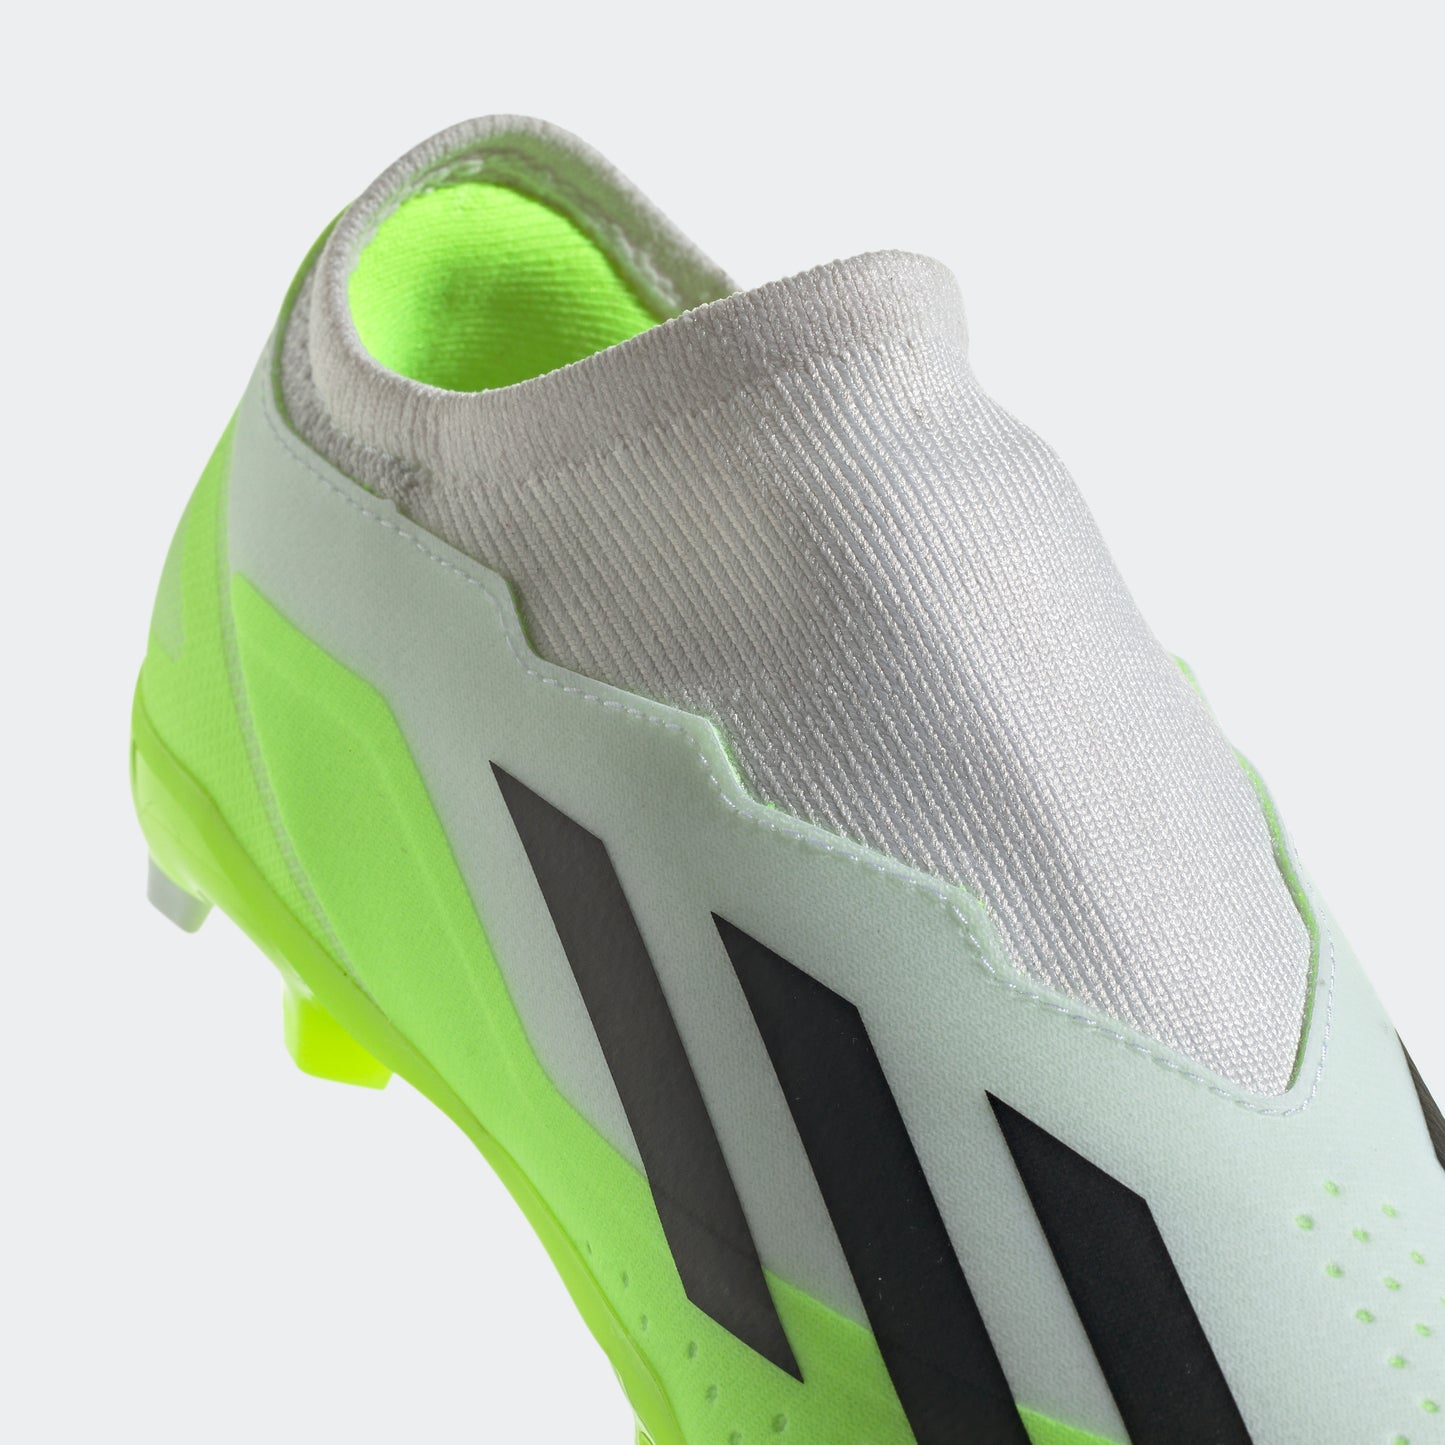 adidas X Crazyfast.3 Laceless Firm Ground Soccer Cleats | White/Green | Youth